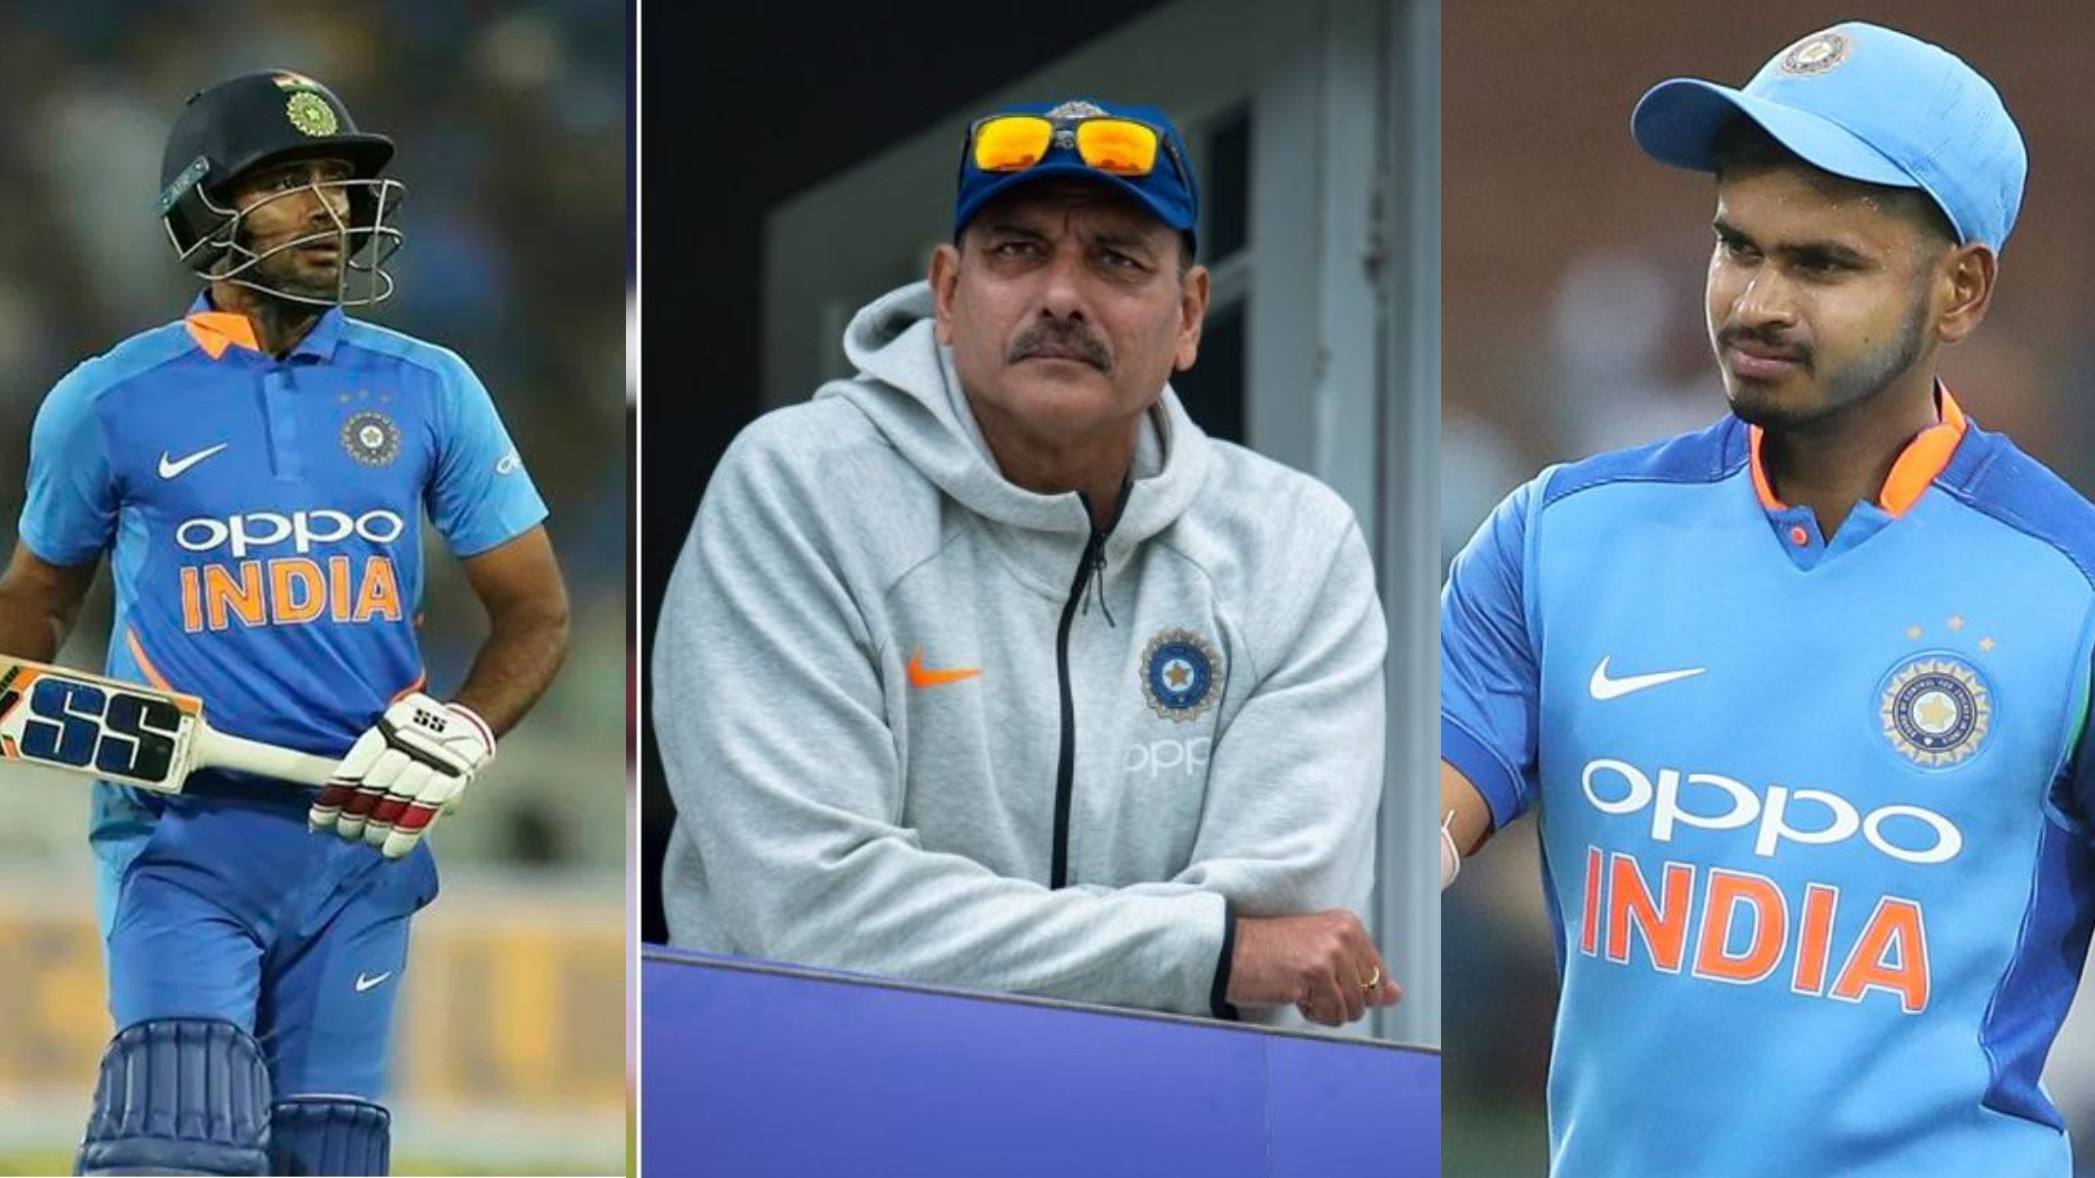 “Either Ambati or Shreyas could've come in”- Shastri says he was unhappy with India’s 2019 WC squad